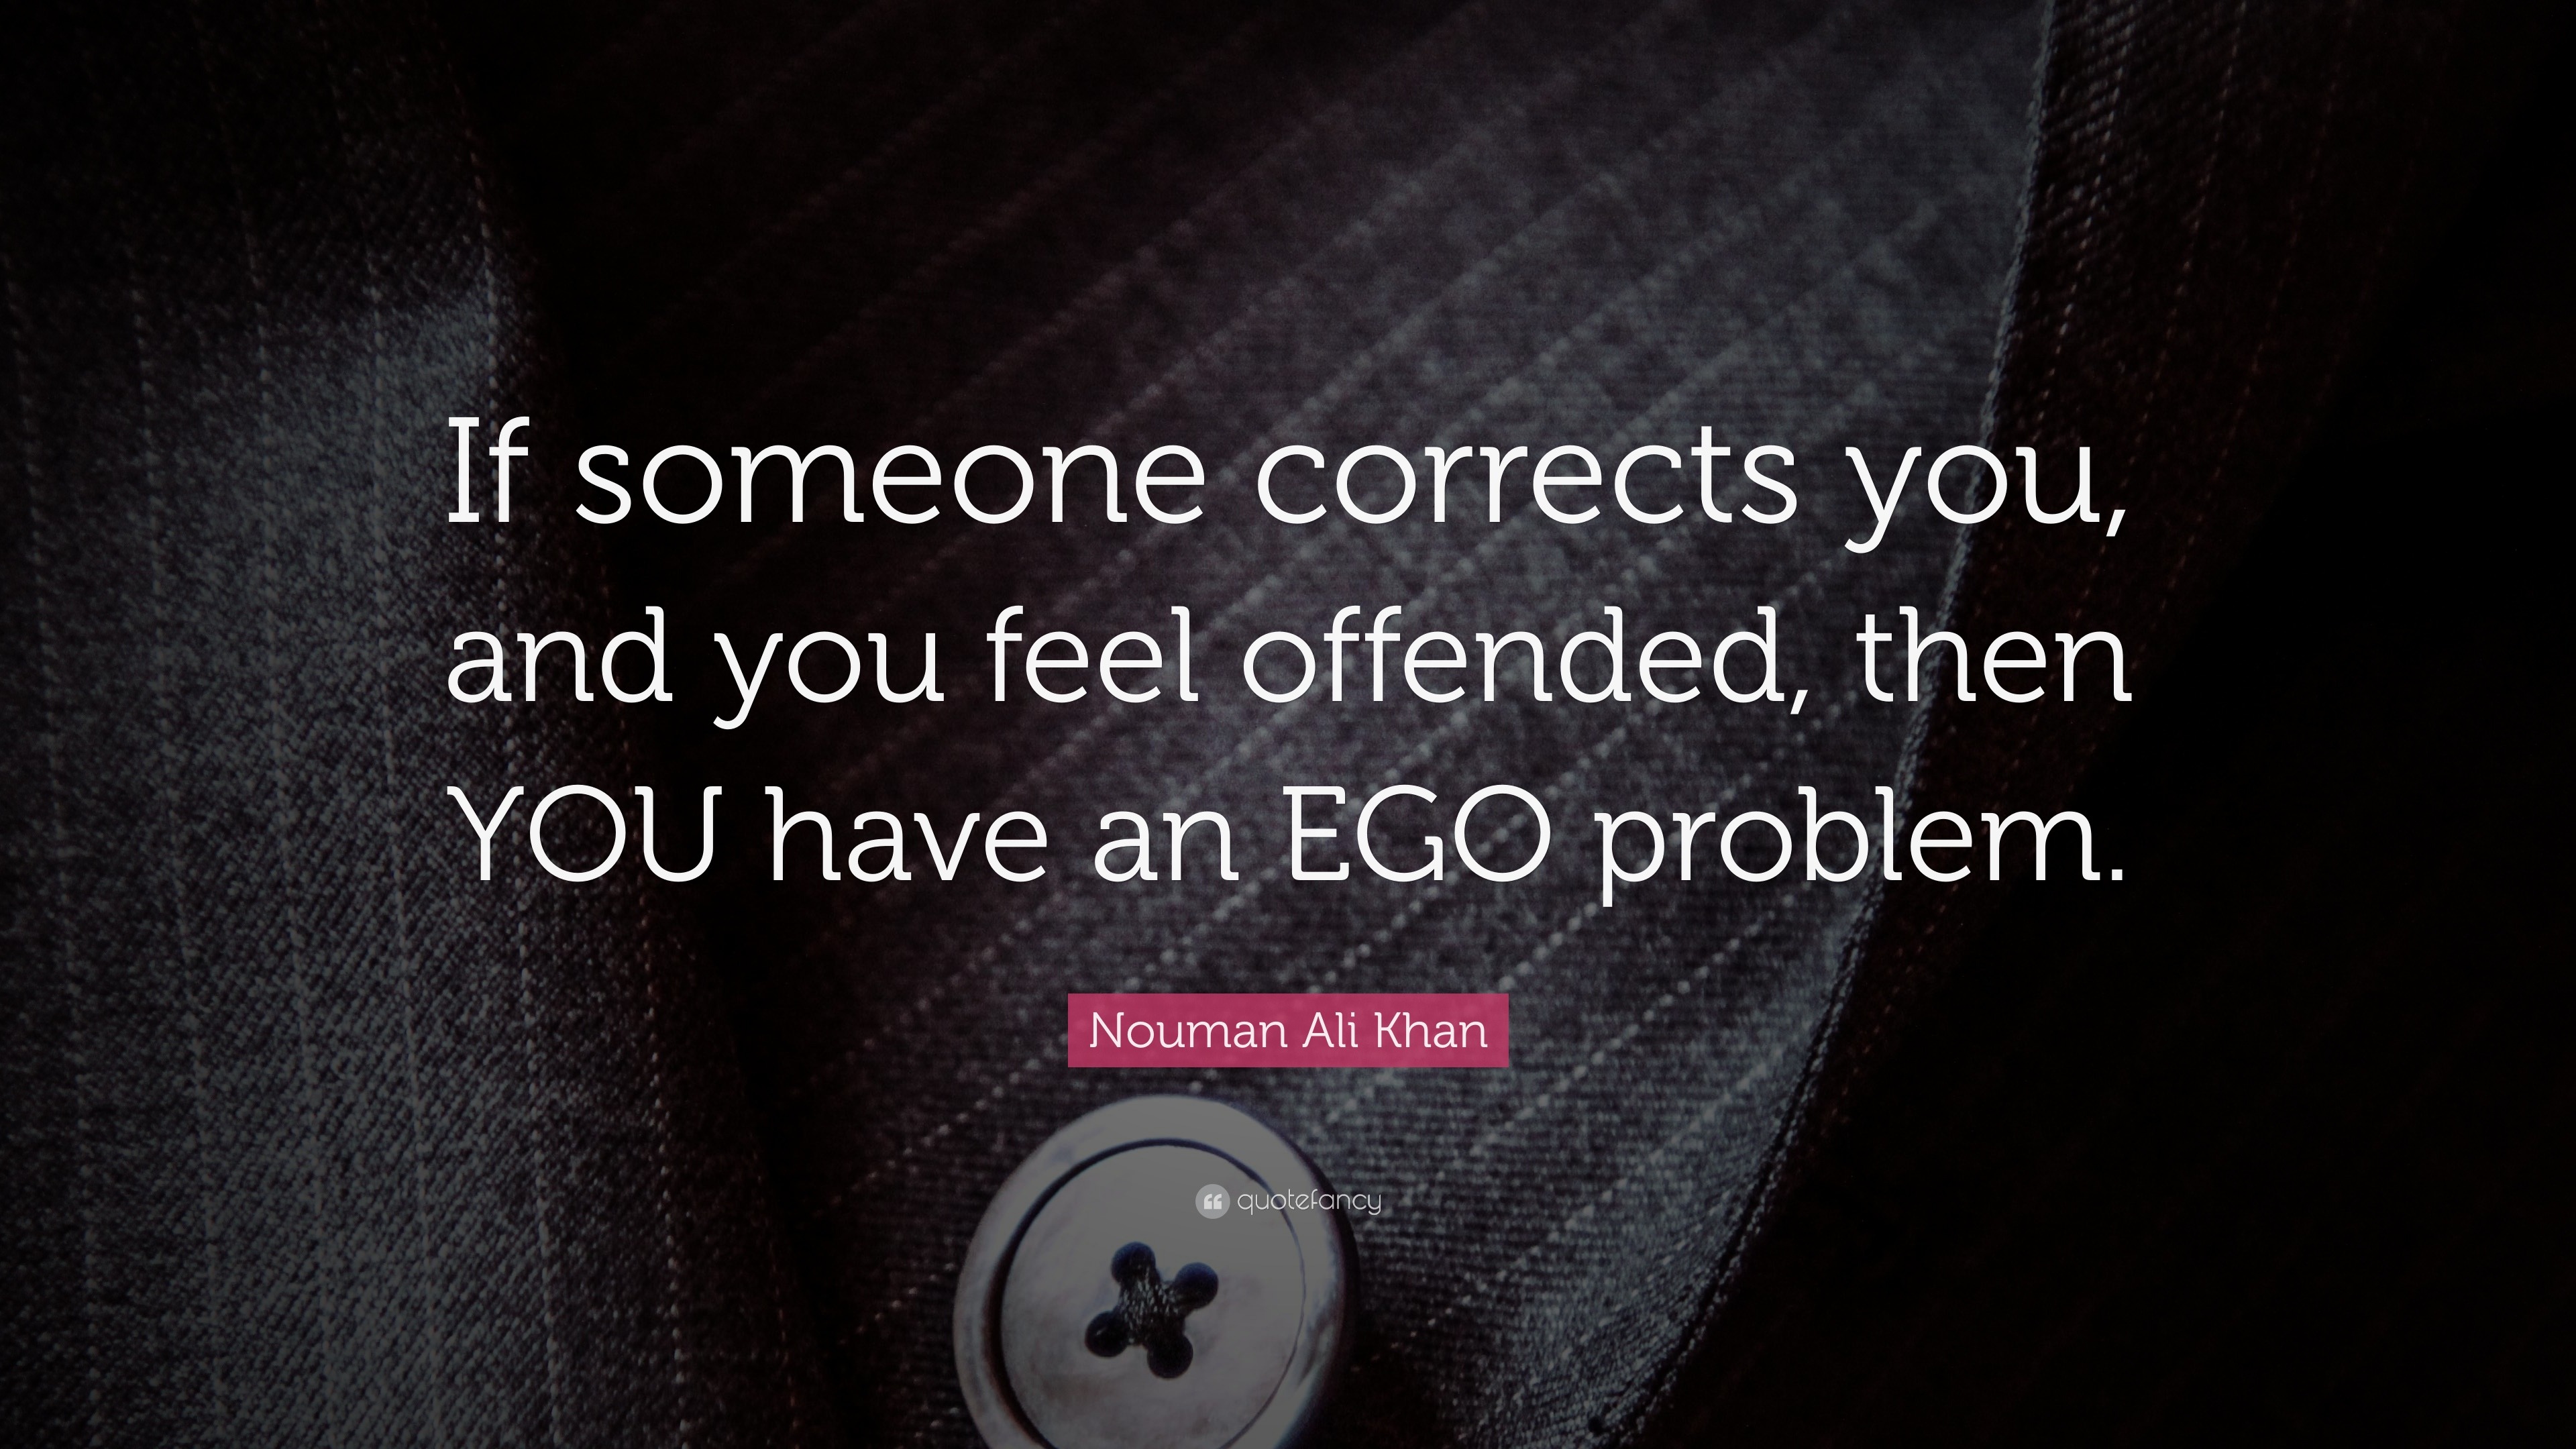 Nouman Ali Khan Quote “If someone corrects you and you feel offended